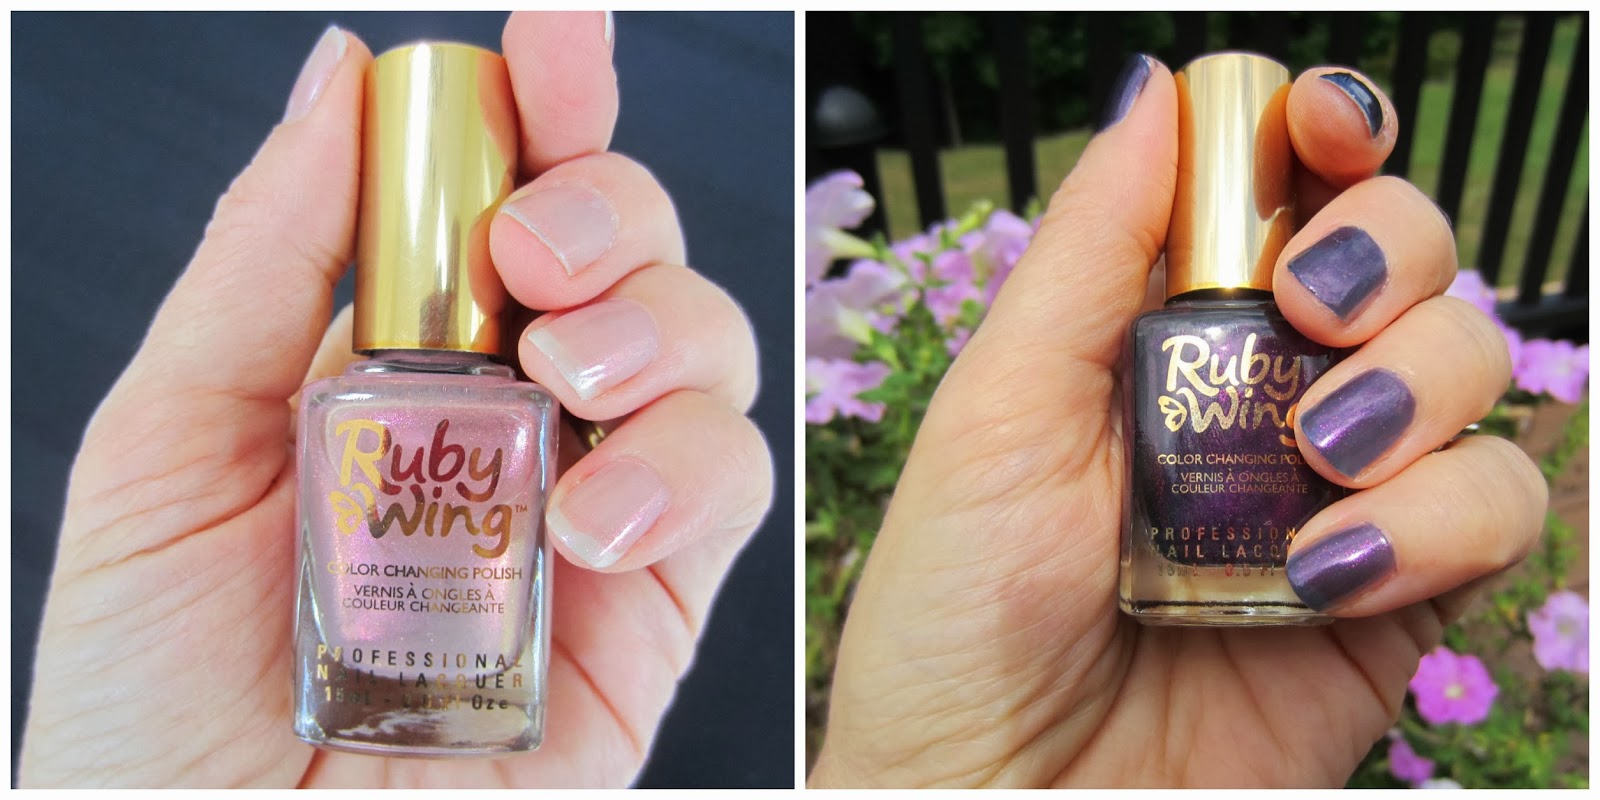 1. Ruby Wing Solar Color Changing Nail Polish - Color Changing ... - wide 6